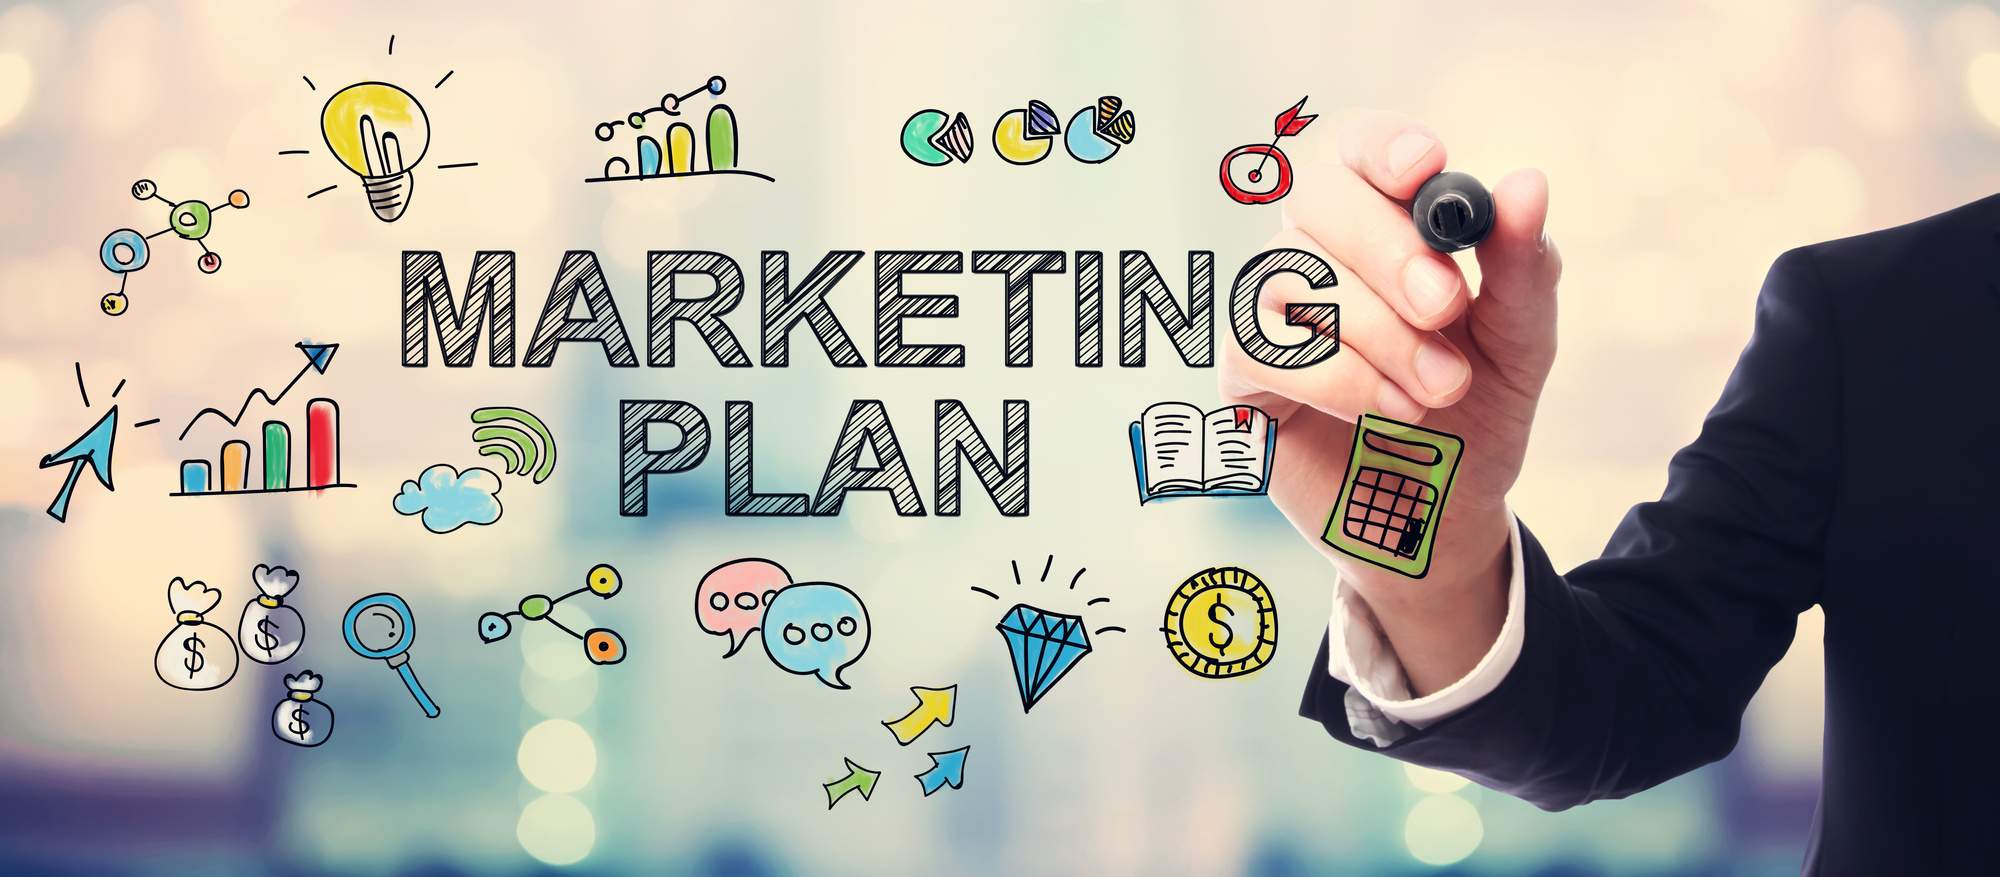 6 Tips on Creating Online Marketing Plans for Small Businesses